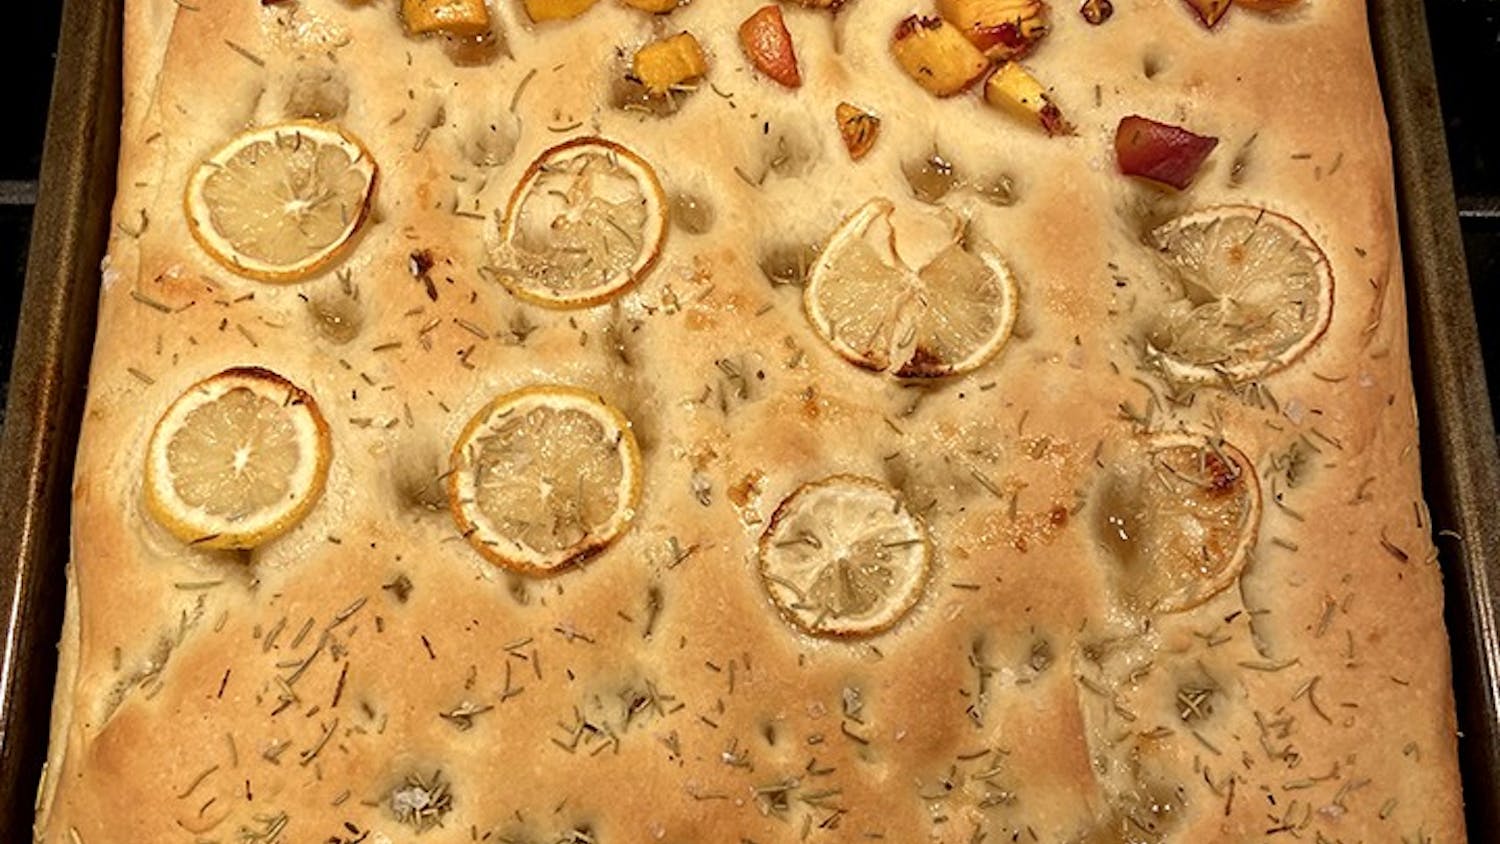 Focaccia bread made by Richie Holmberg. 